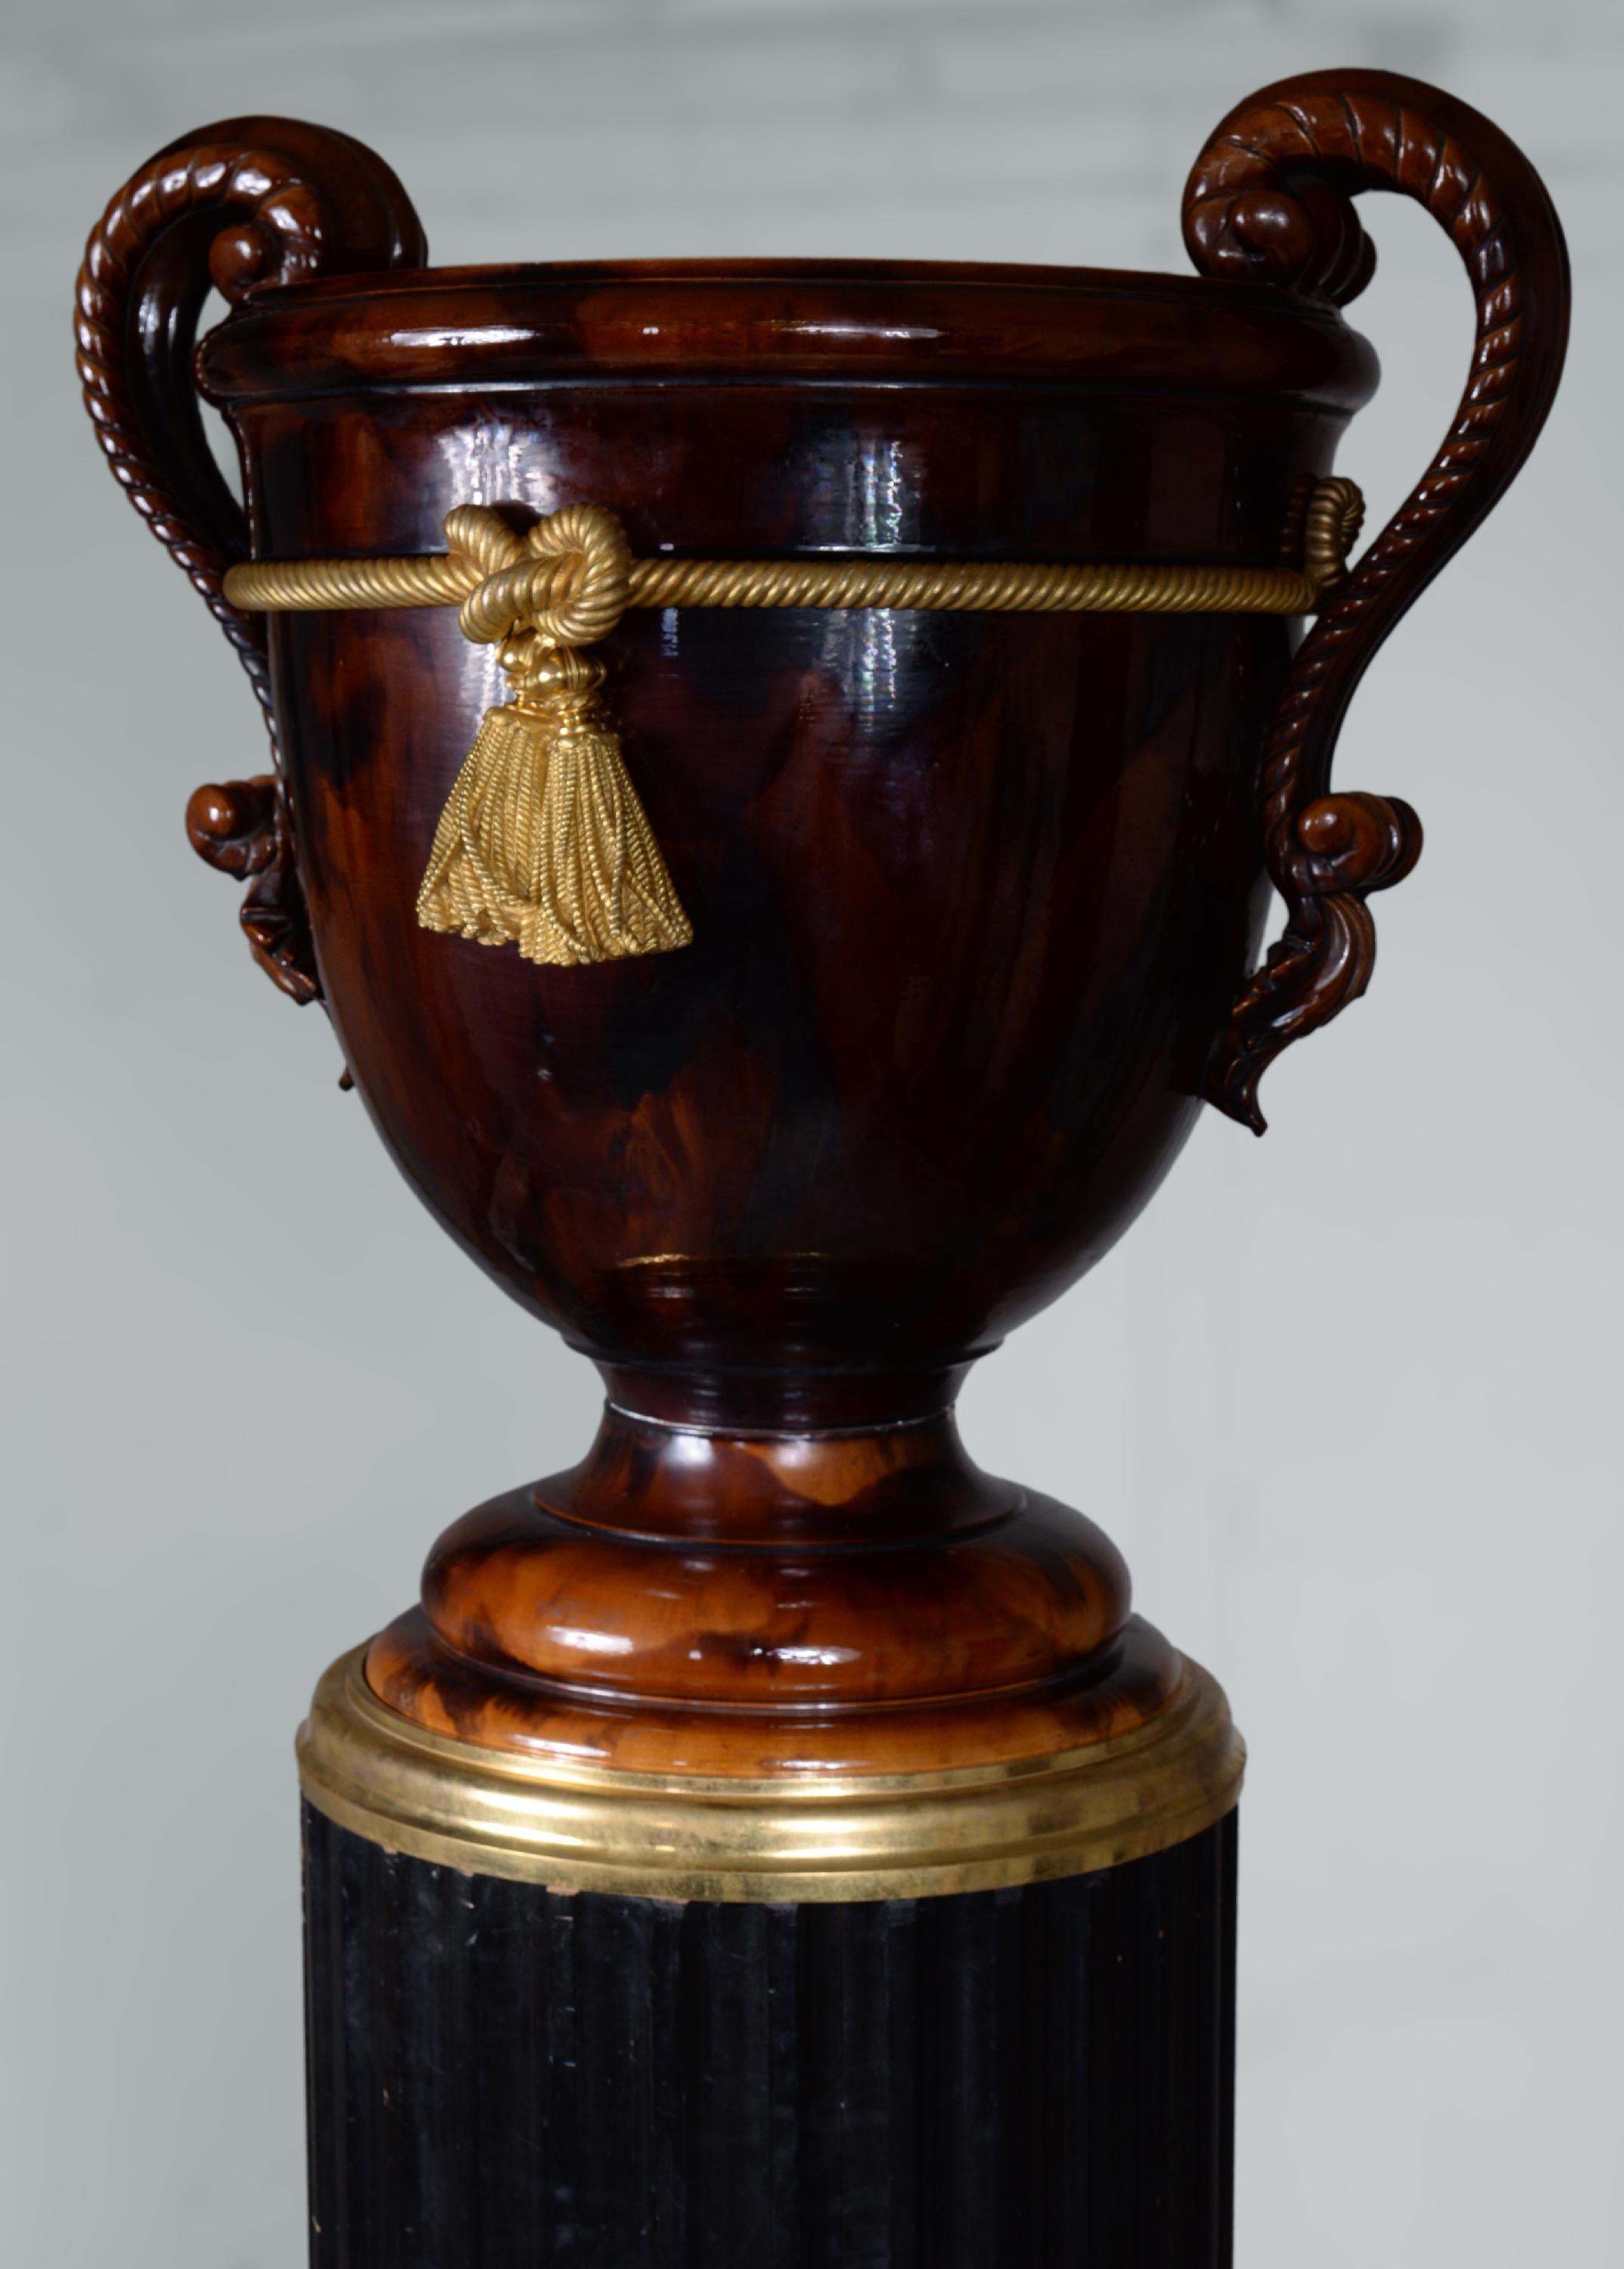 This monumental vase of Napoleon III style was realized in ceramic, bronze and blackened wood. A large column in black pear wood of Doric order support a superb vase with elegant curves. The bronze base blends into the curves of the ceramic vase,